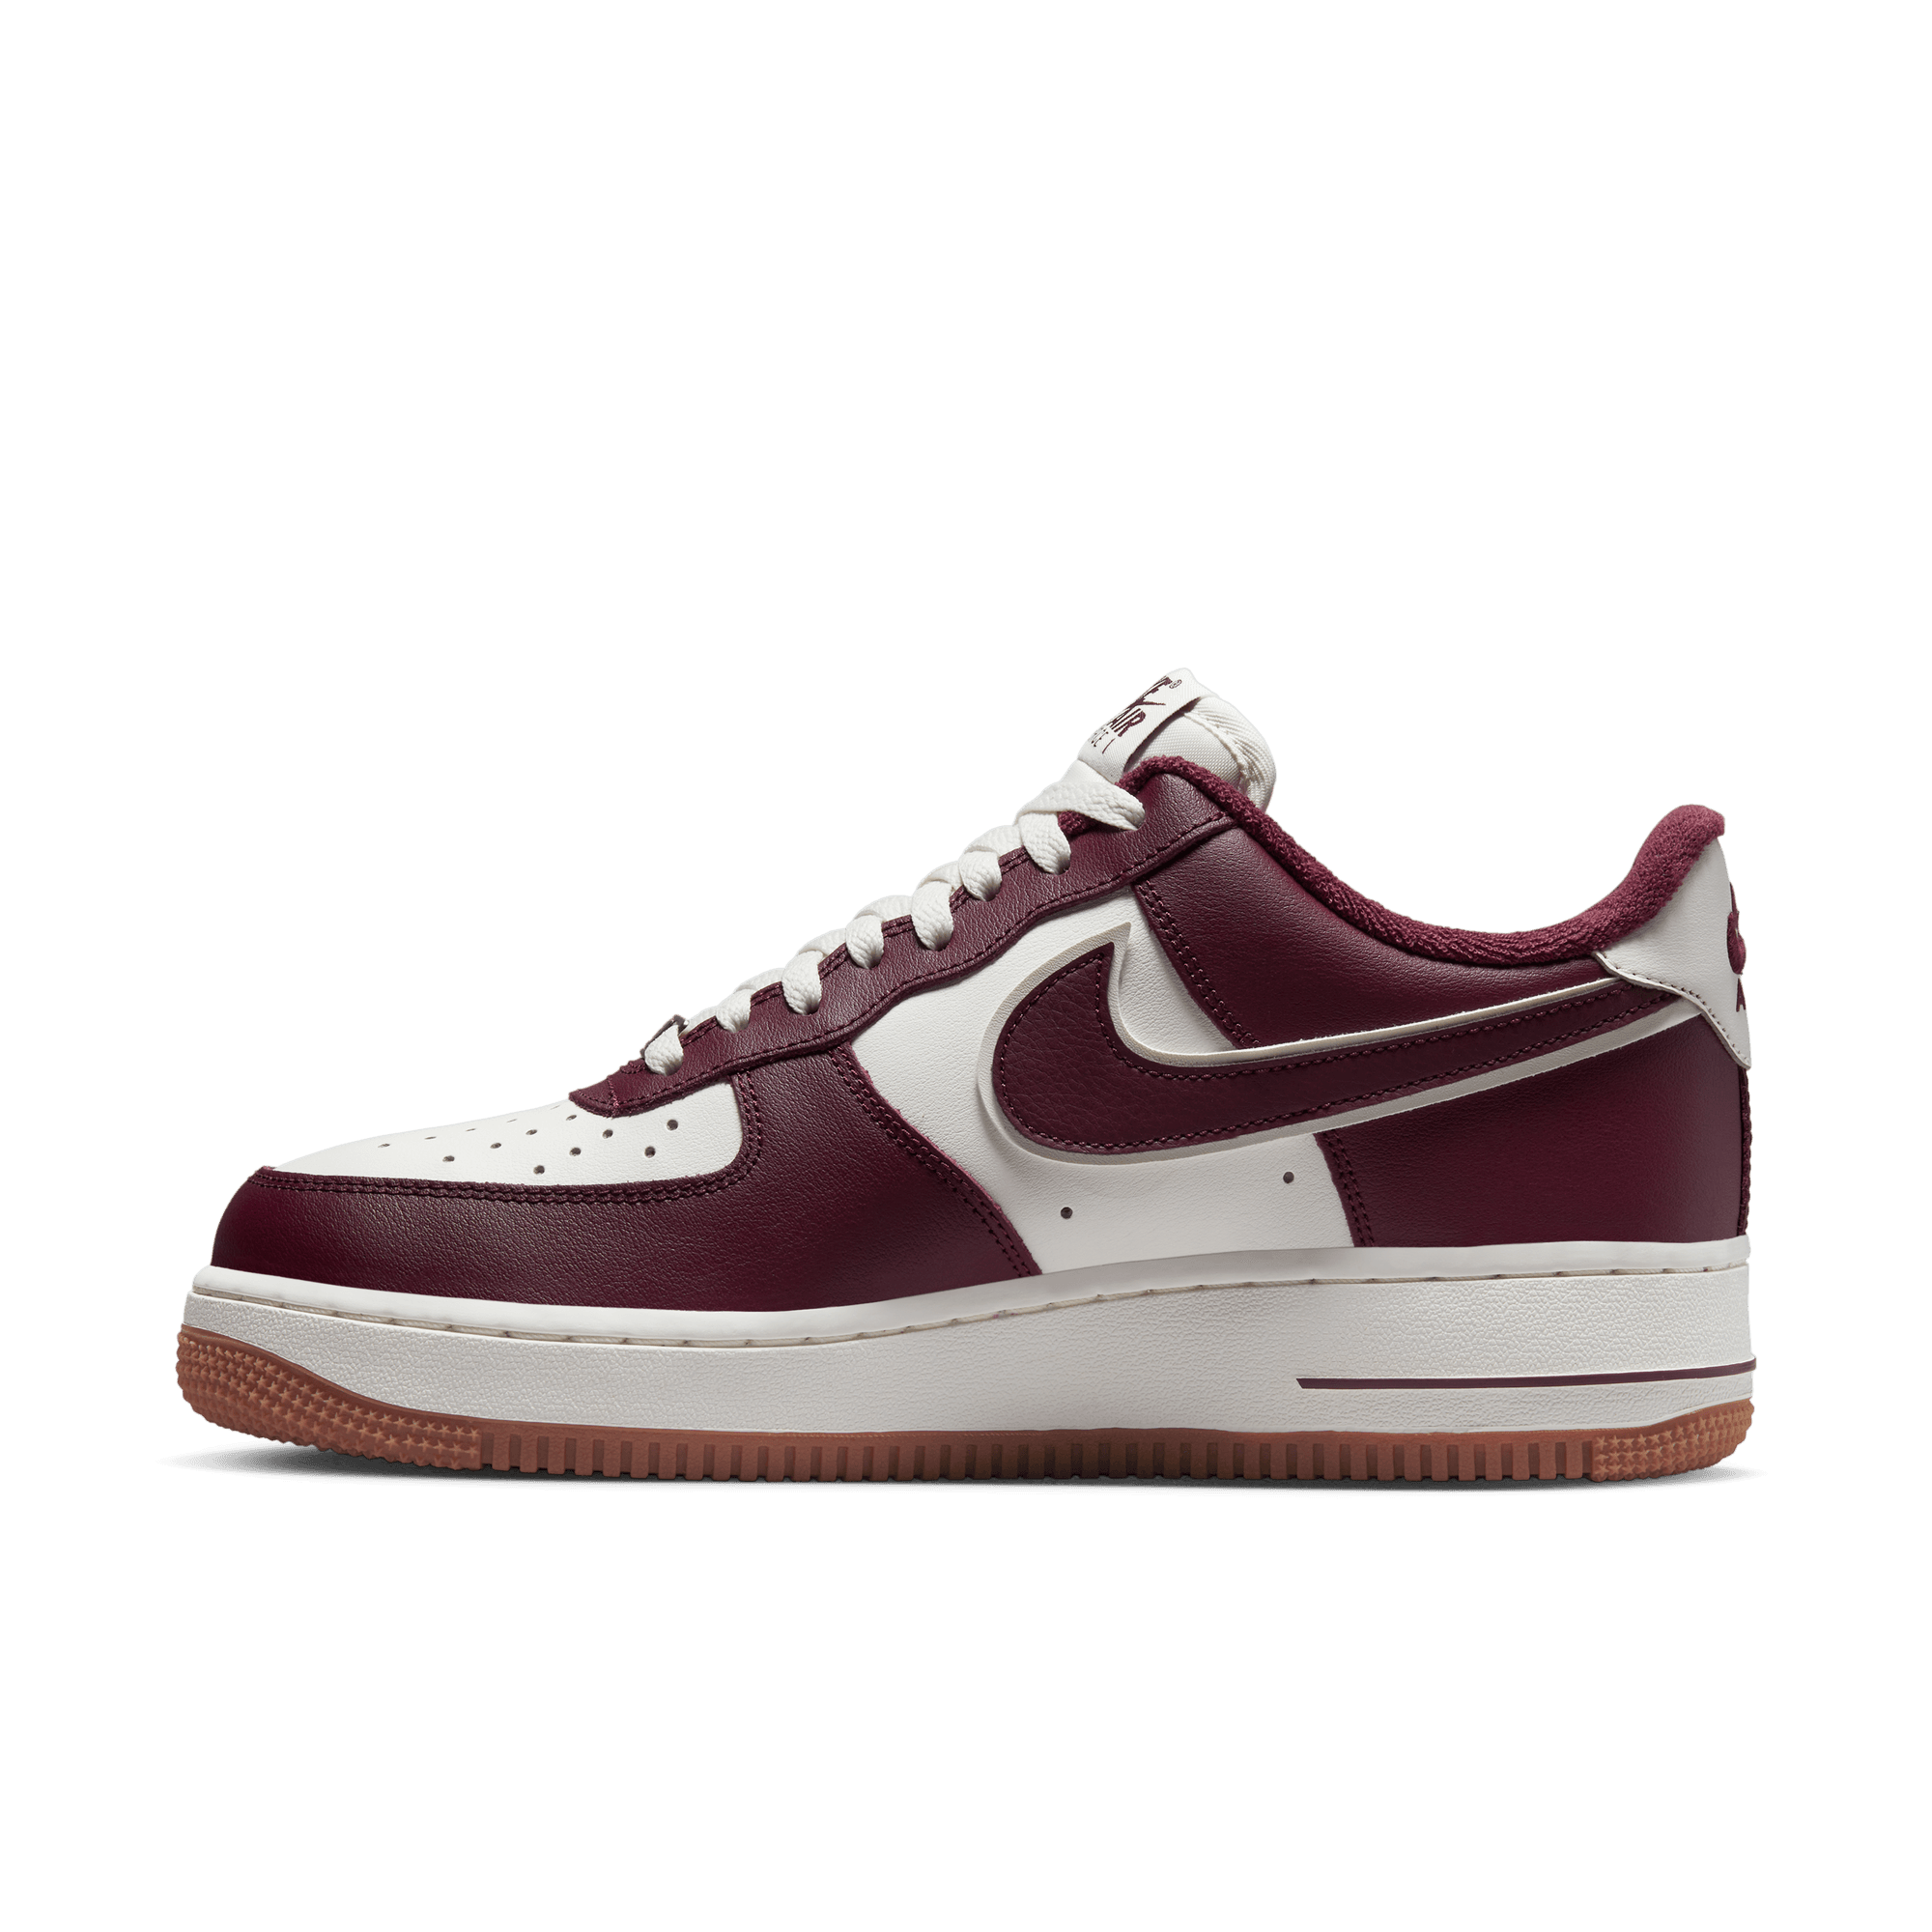 Nike Men's Air Force 1 '07 LV8 World Champ Shoes